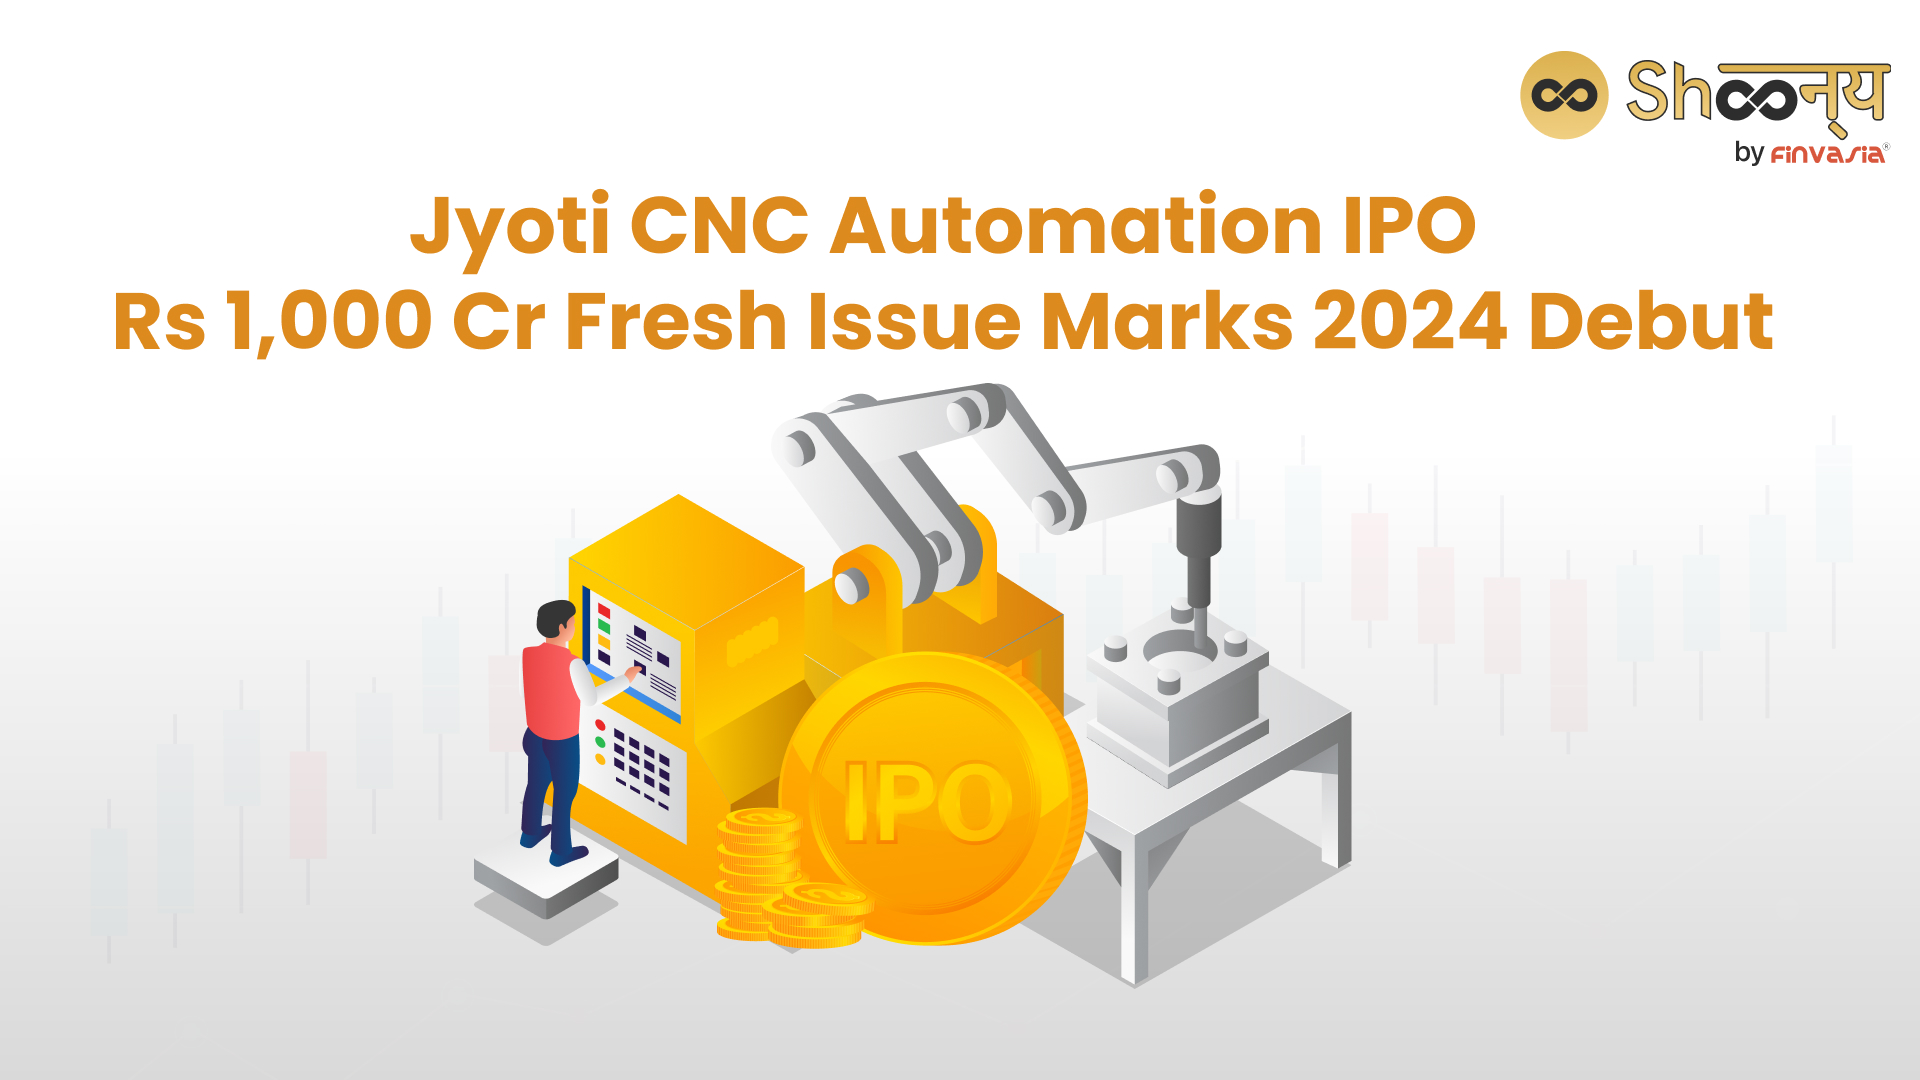 Jyoti CNC Automation IPO: Rs 1,000 Cr IPO Scheduled on Jan 9